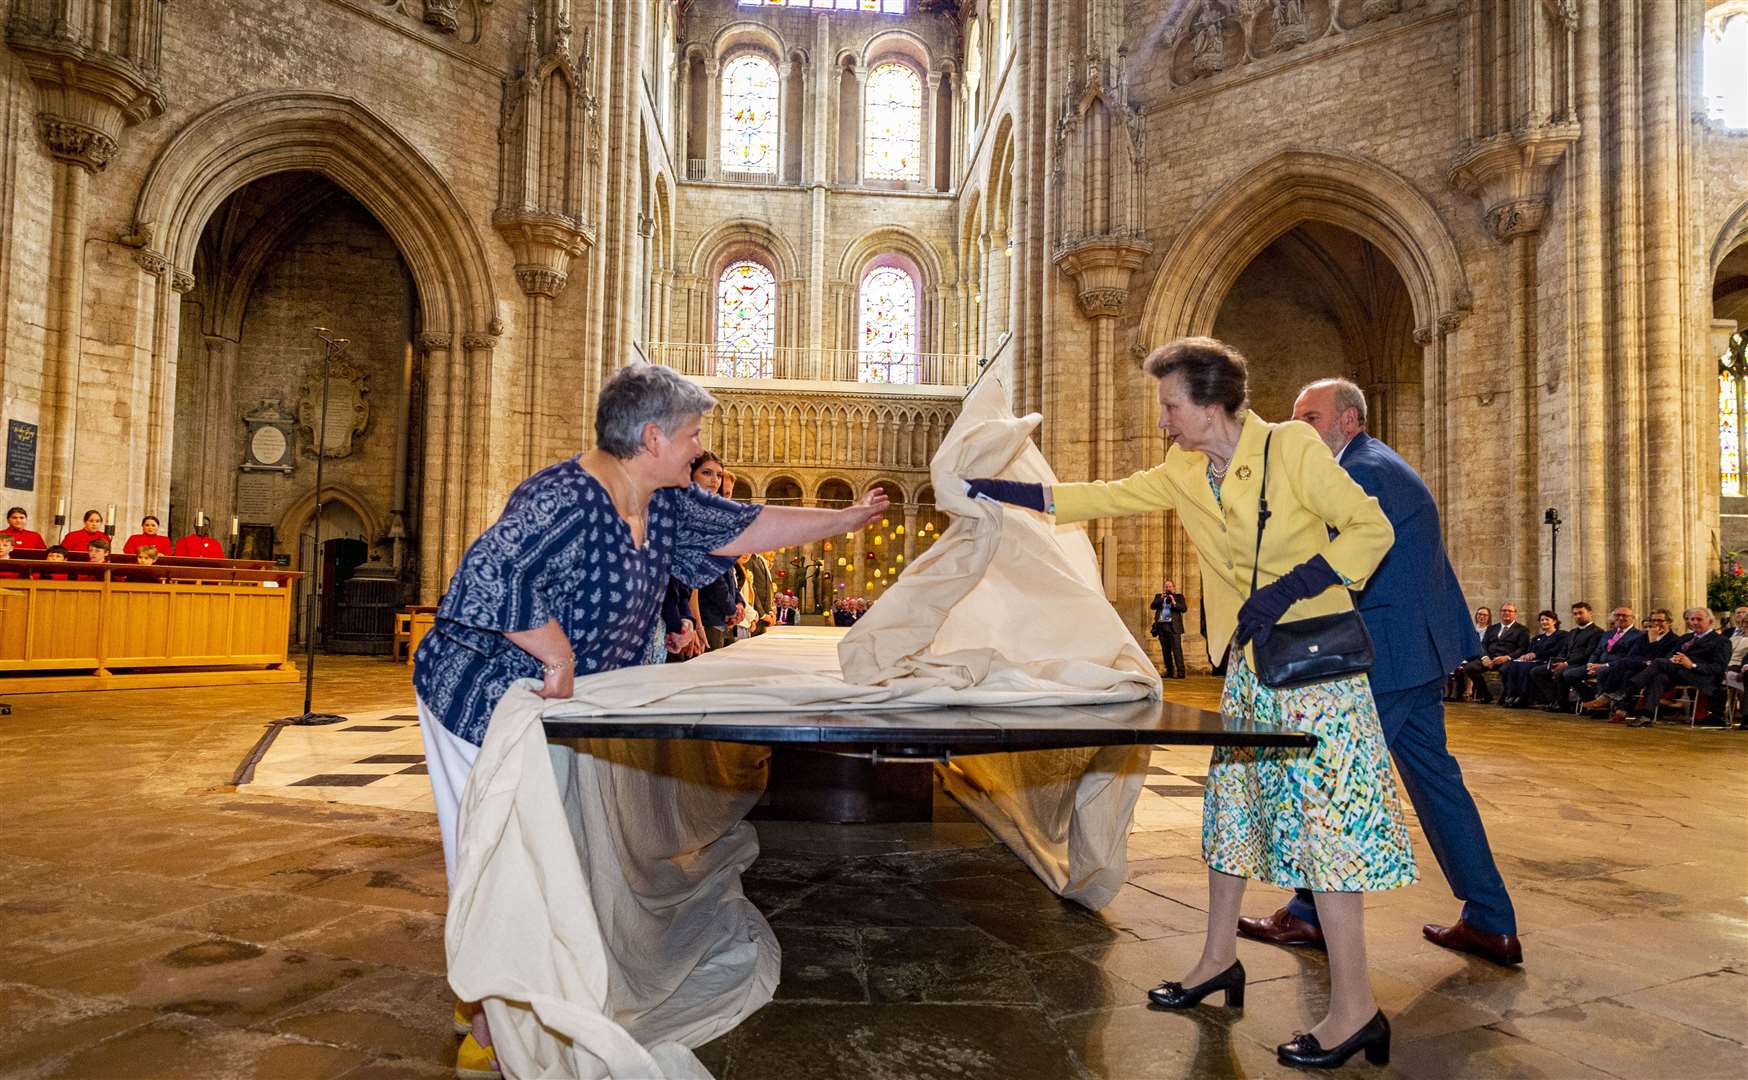 Princess Anne visited at Ely Cathedral to unveil the The Fenland Black Oak Table